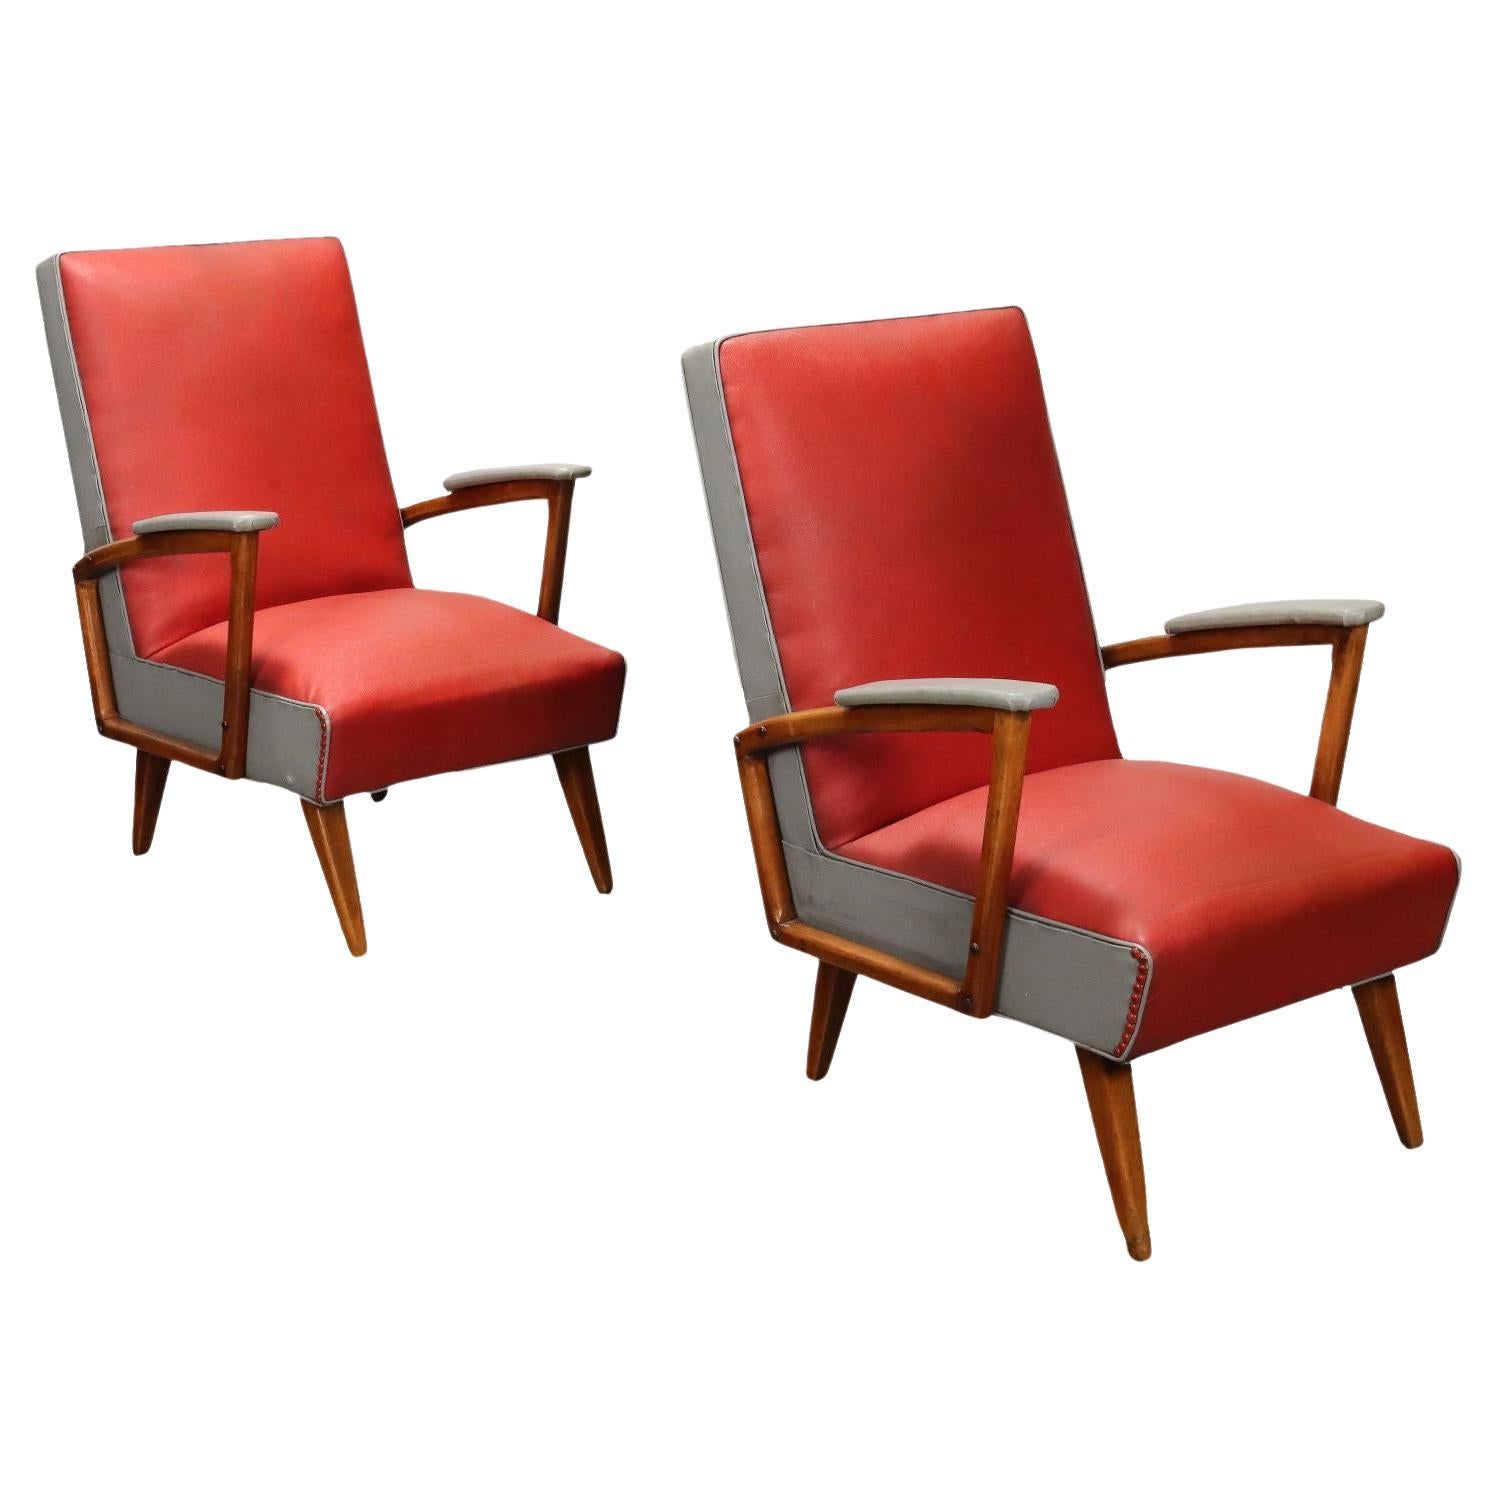 Argentine 50s Red Armchairs For Sale